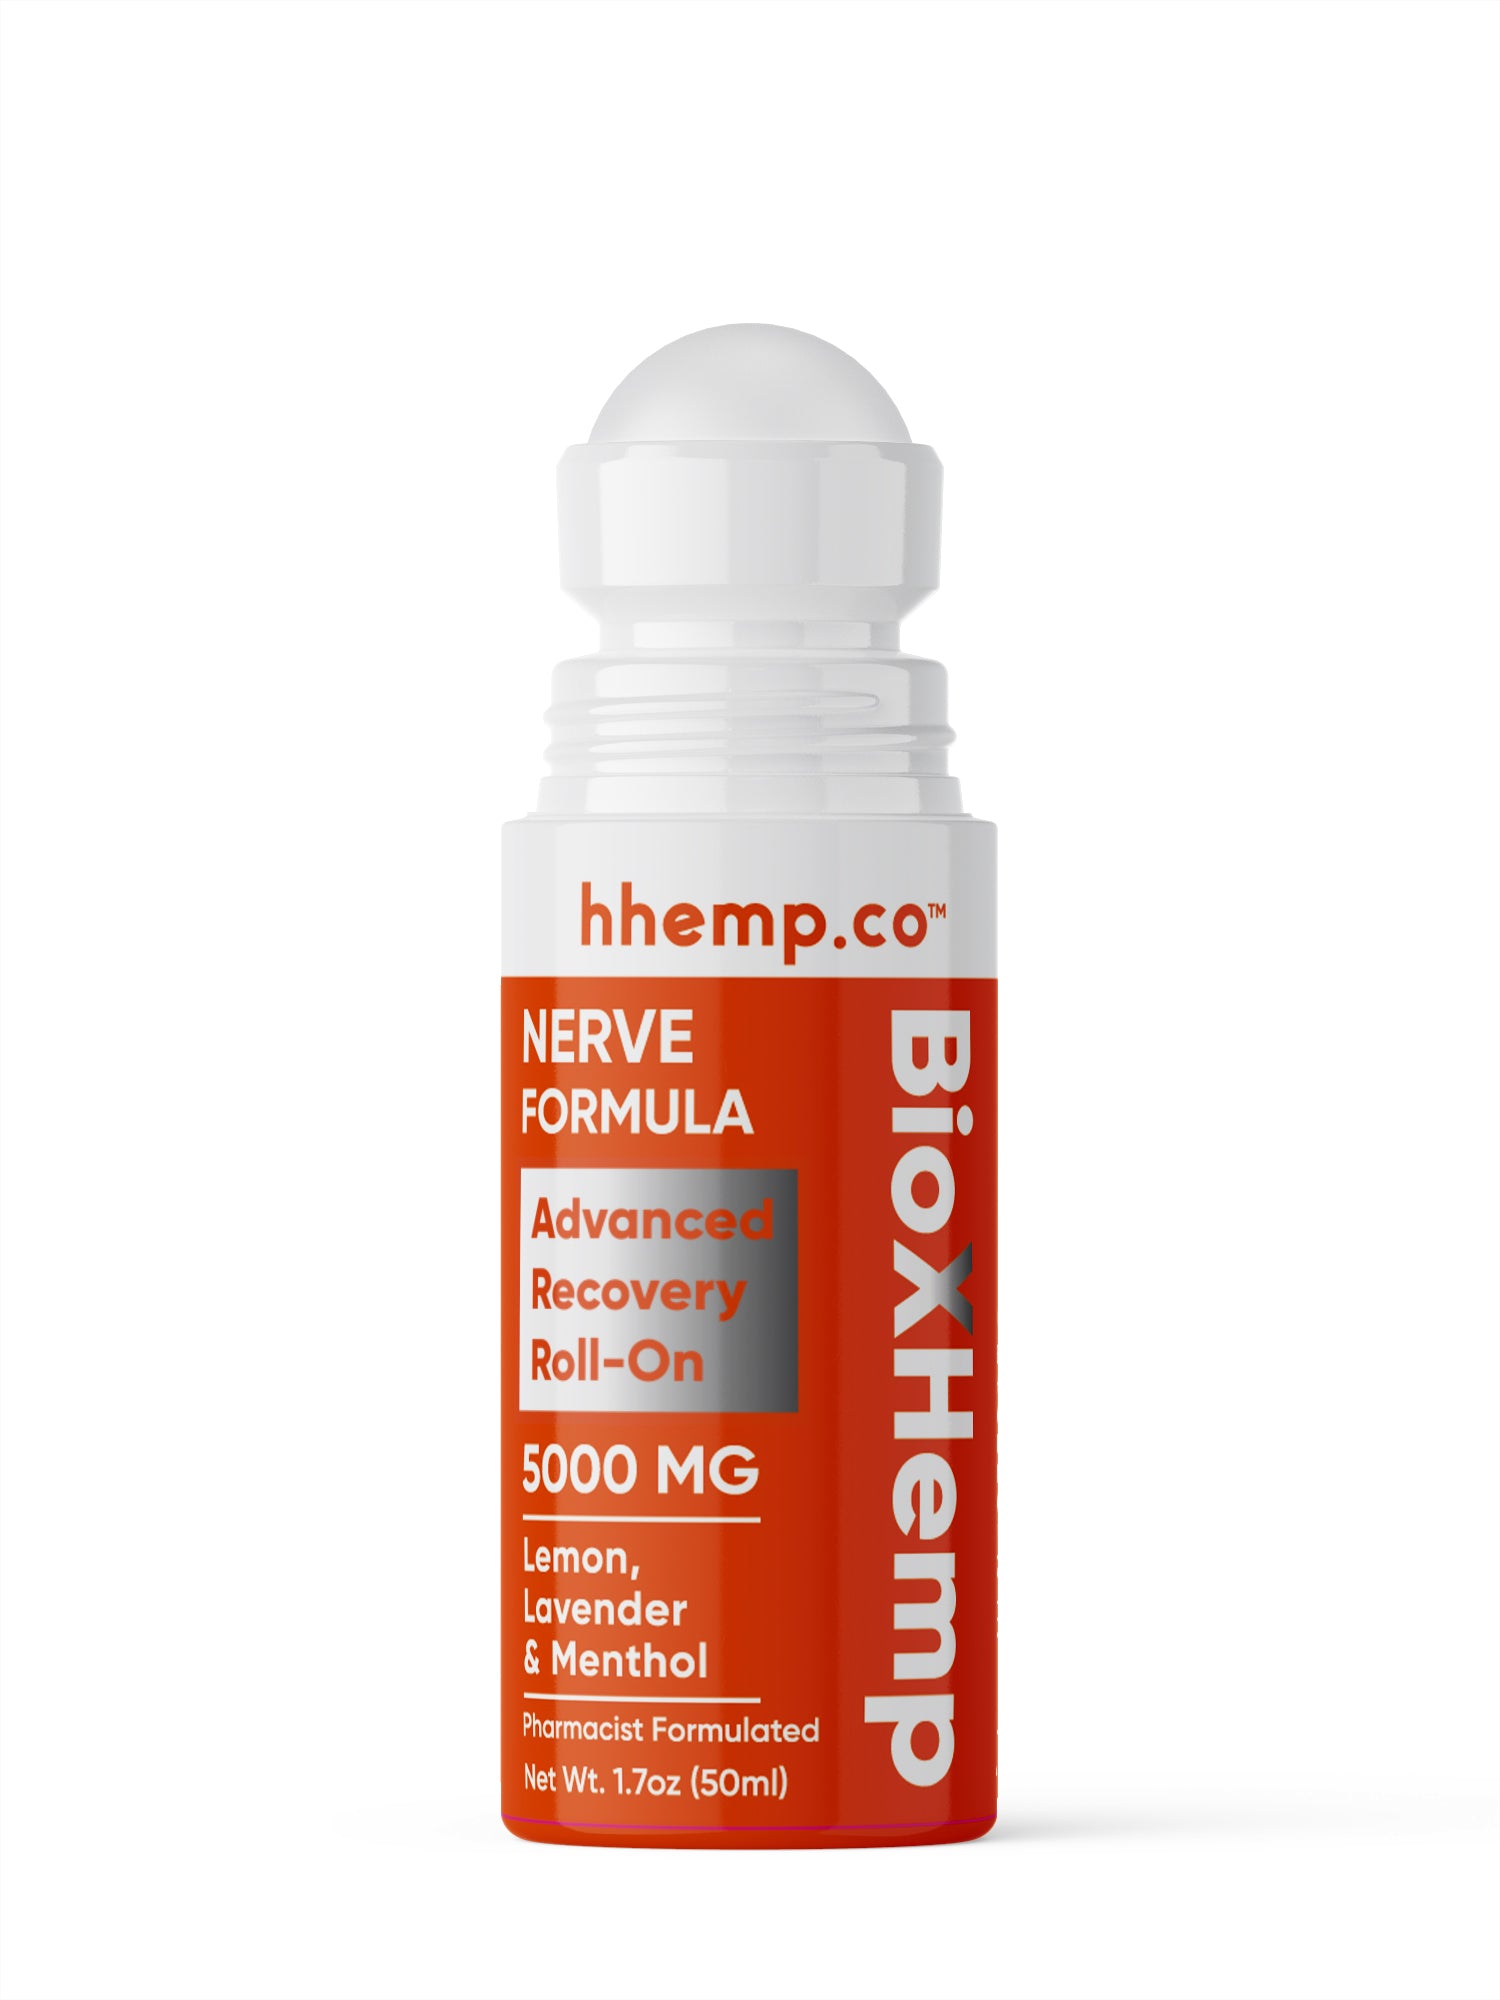 5000mg Advanced Nerve Recovery Roll-On - Lemon, Lavender and Menthol